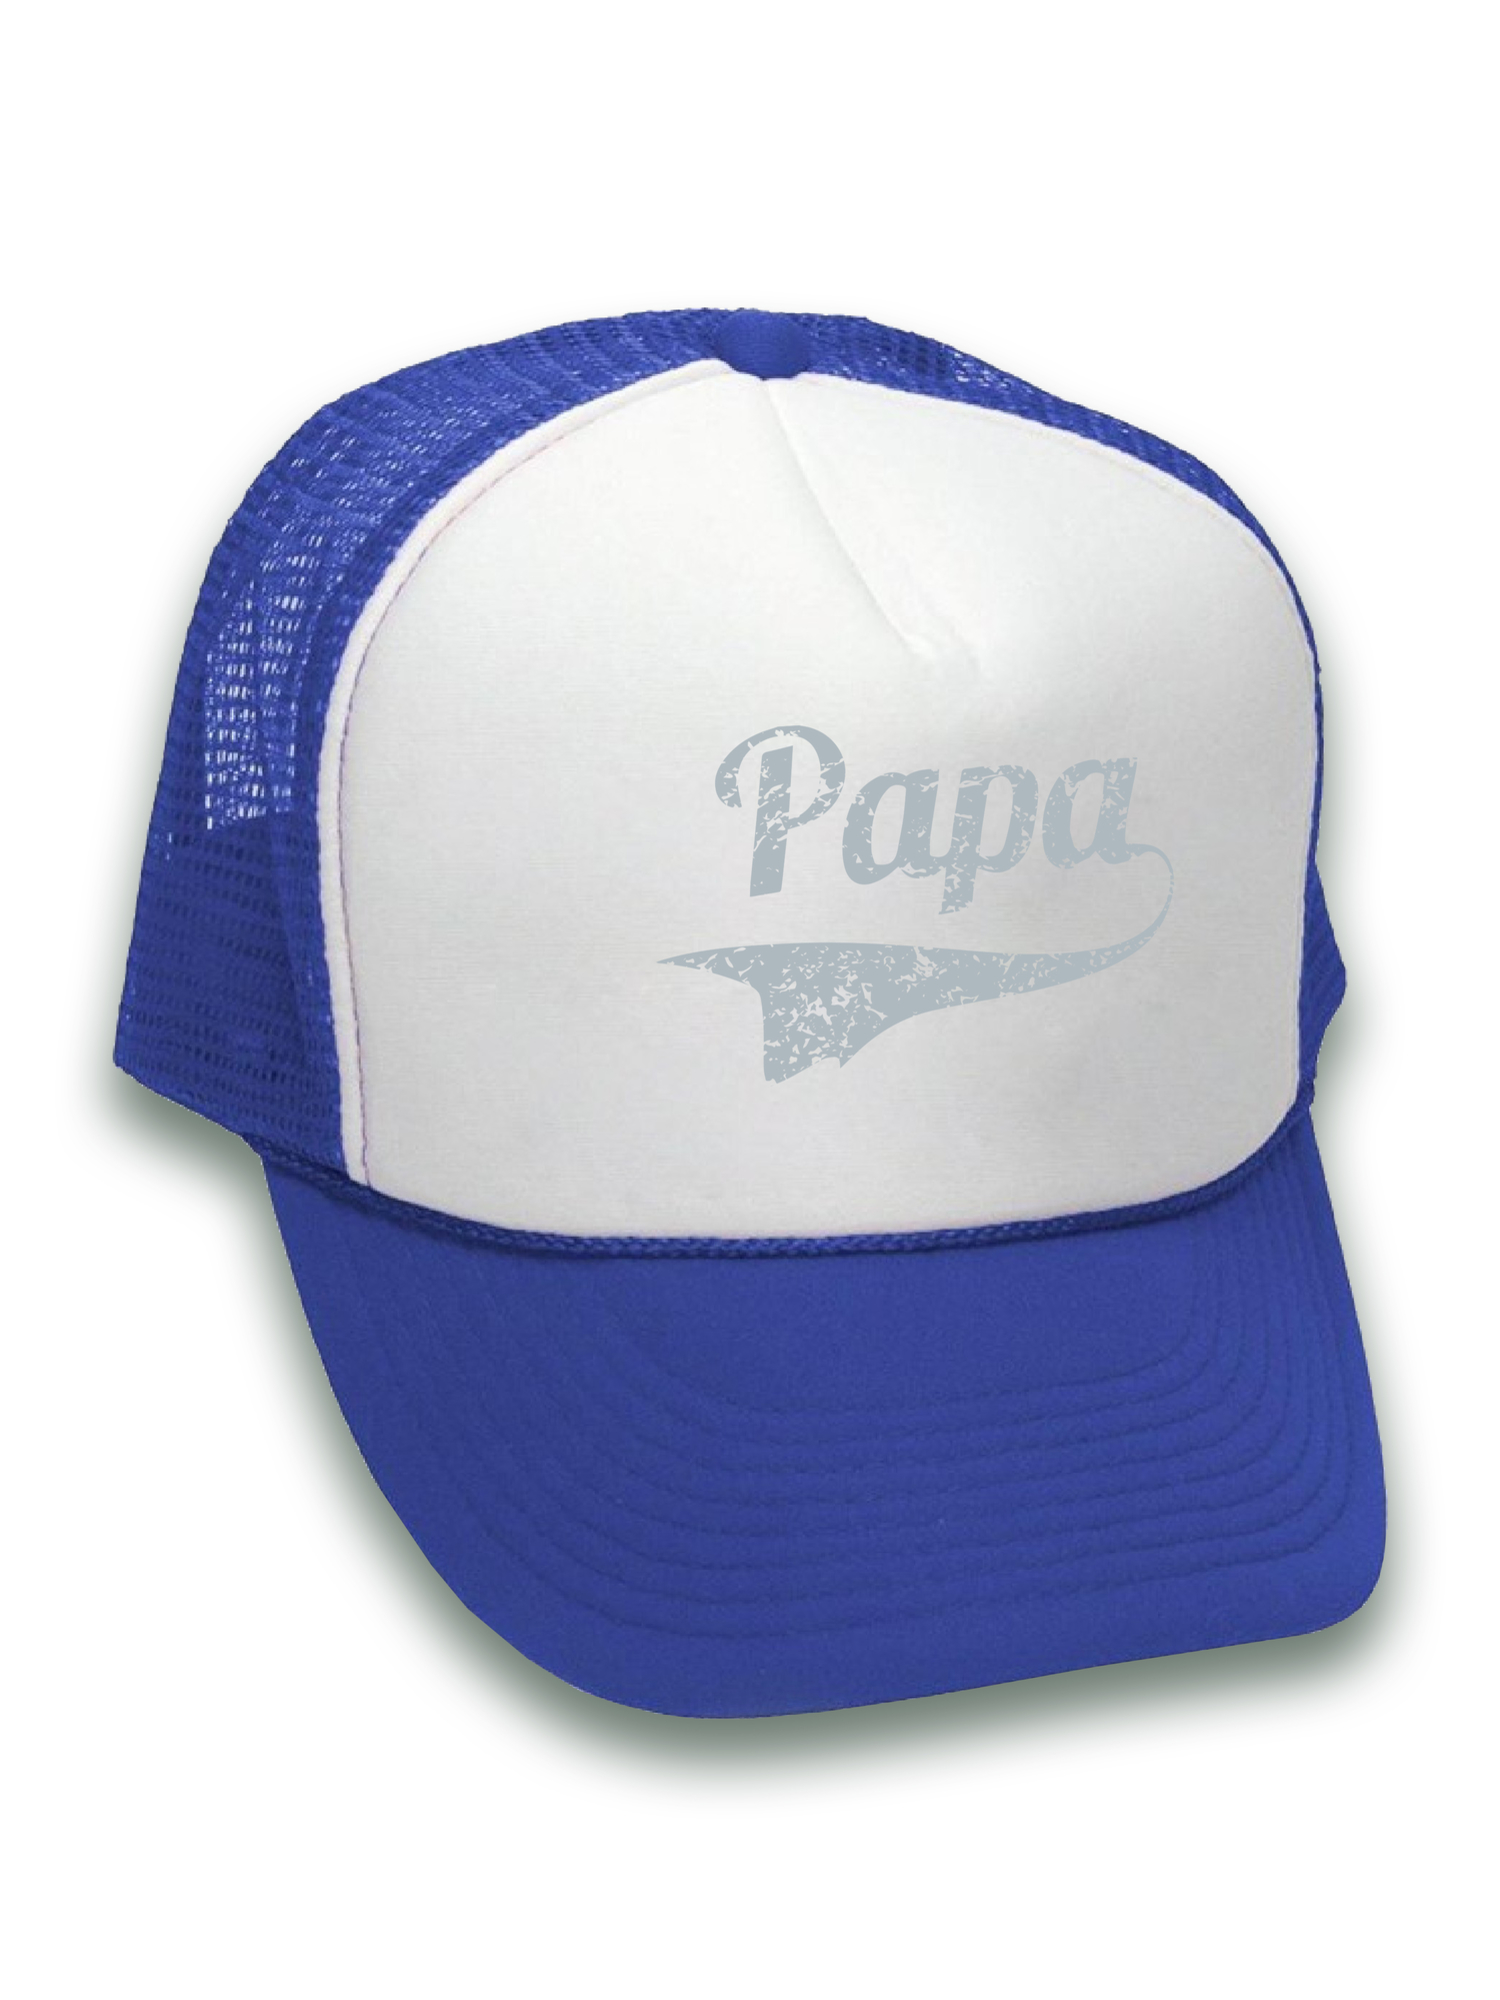 Awkward Styles Papa Trucker Hat Father's Day Gifts for Men Dad Hats Dad 2018 Trucker Hat Funny Gifts for Dad Hat Accessories for Men Father Trucker Hat Daddy 2018 Snapback Hat Dad Hats with Sayings - image 2 of 6